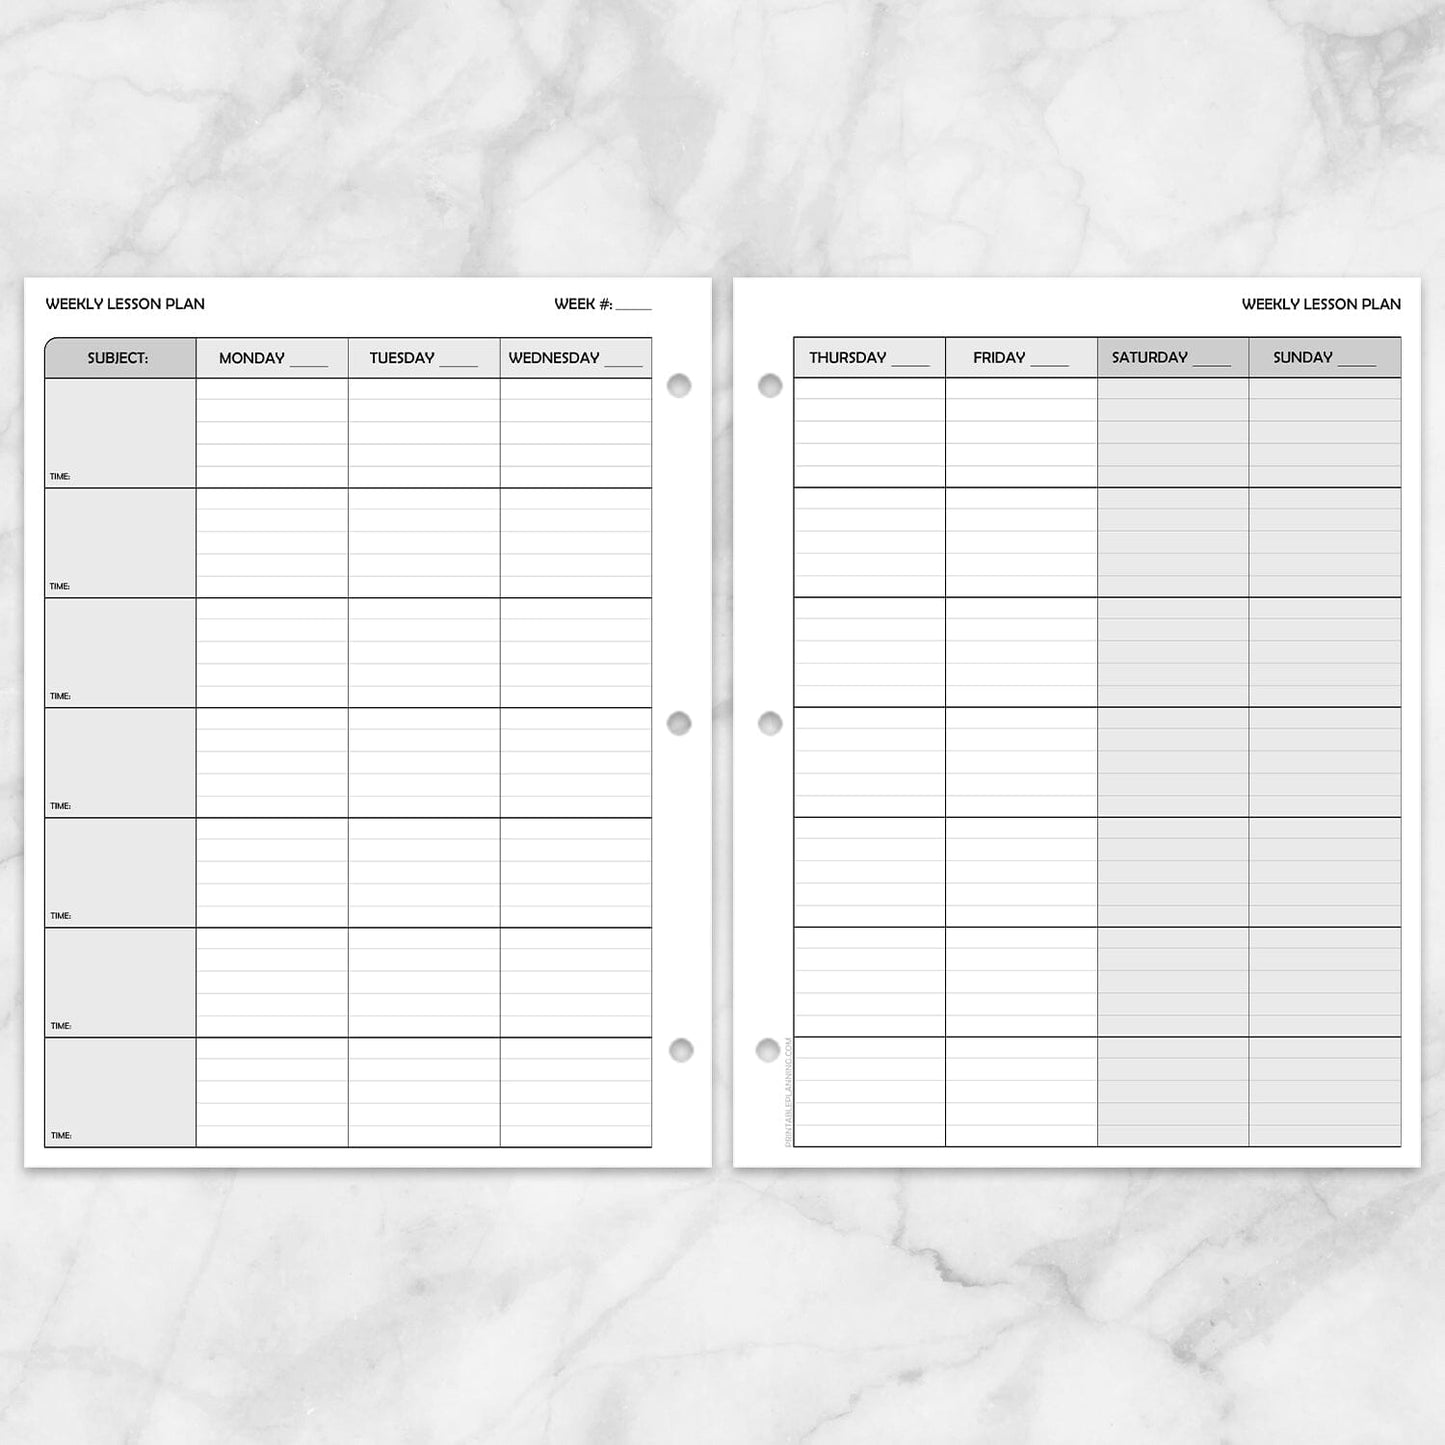 Printable Weekly Lesson Plan for Teachers - School Planning Pages (front and back, facing pages) at Printable Planning.